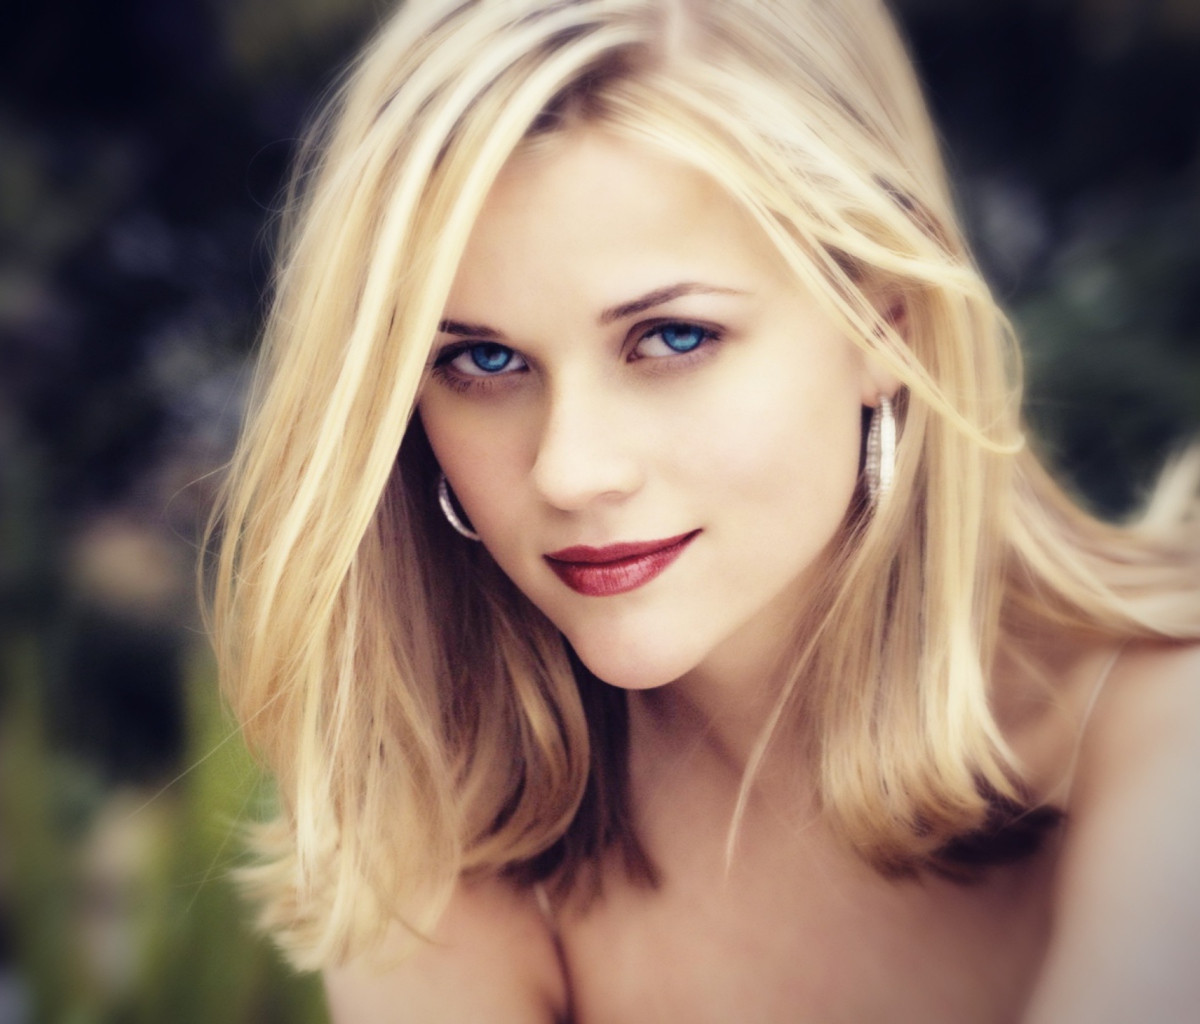 Das Reese Witherspoon Wallpaper 1200x1024